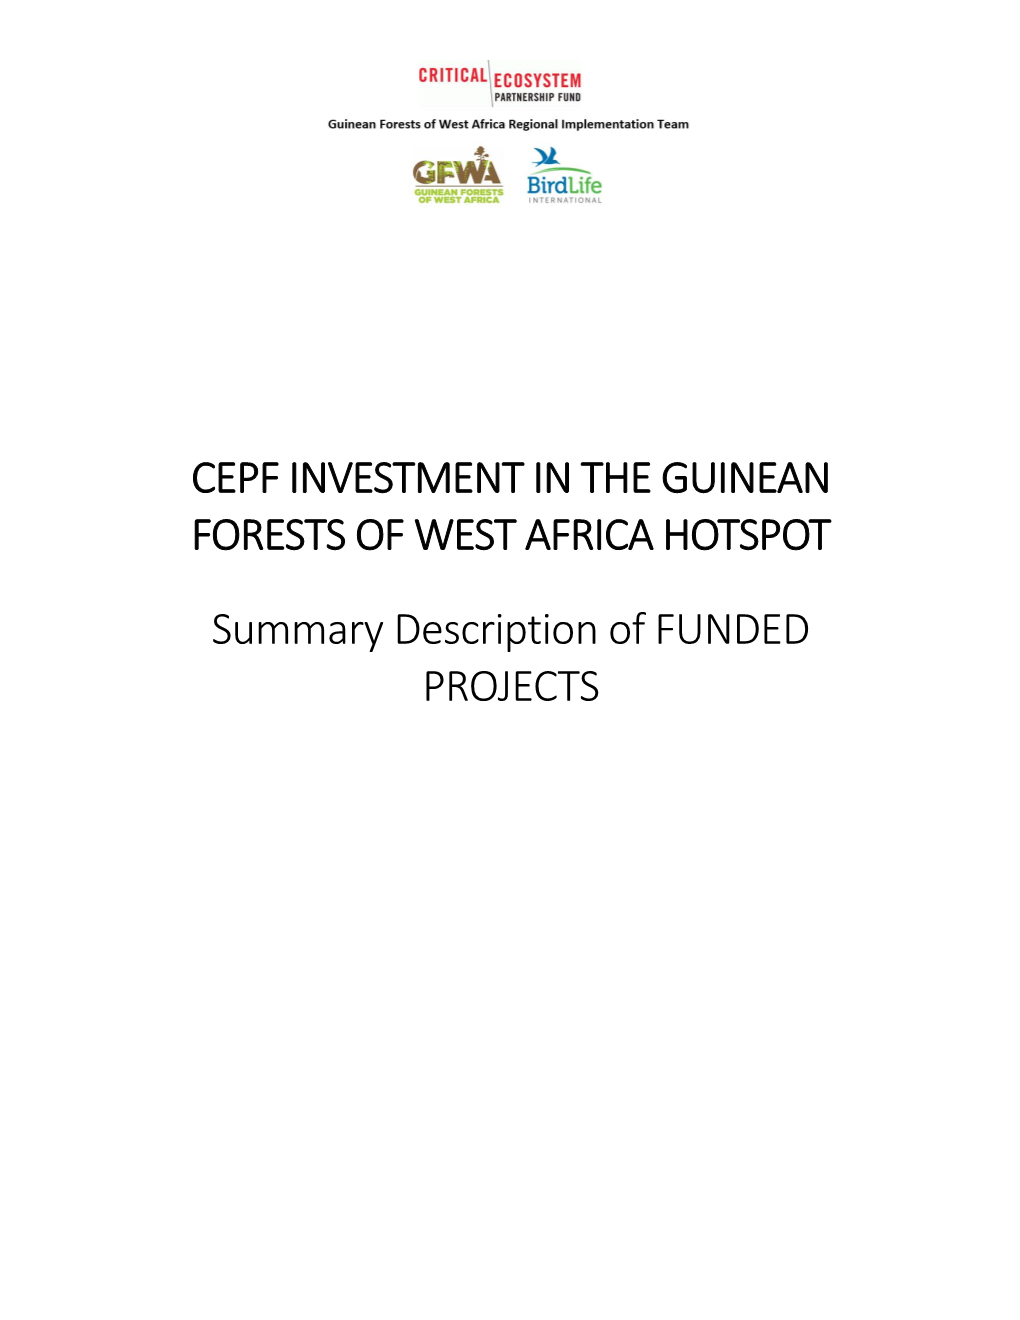 Cepf Investment in the Guinean Forests of West Africa Hotspot